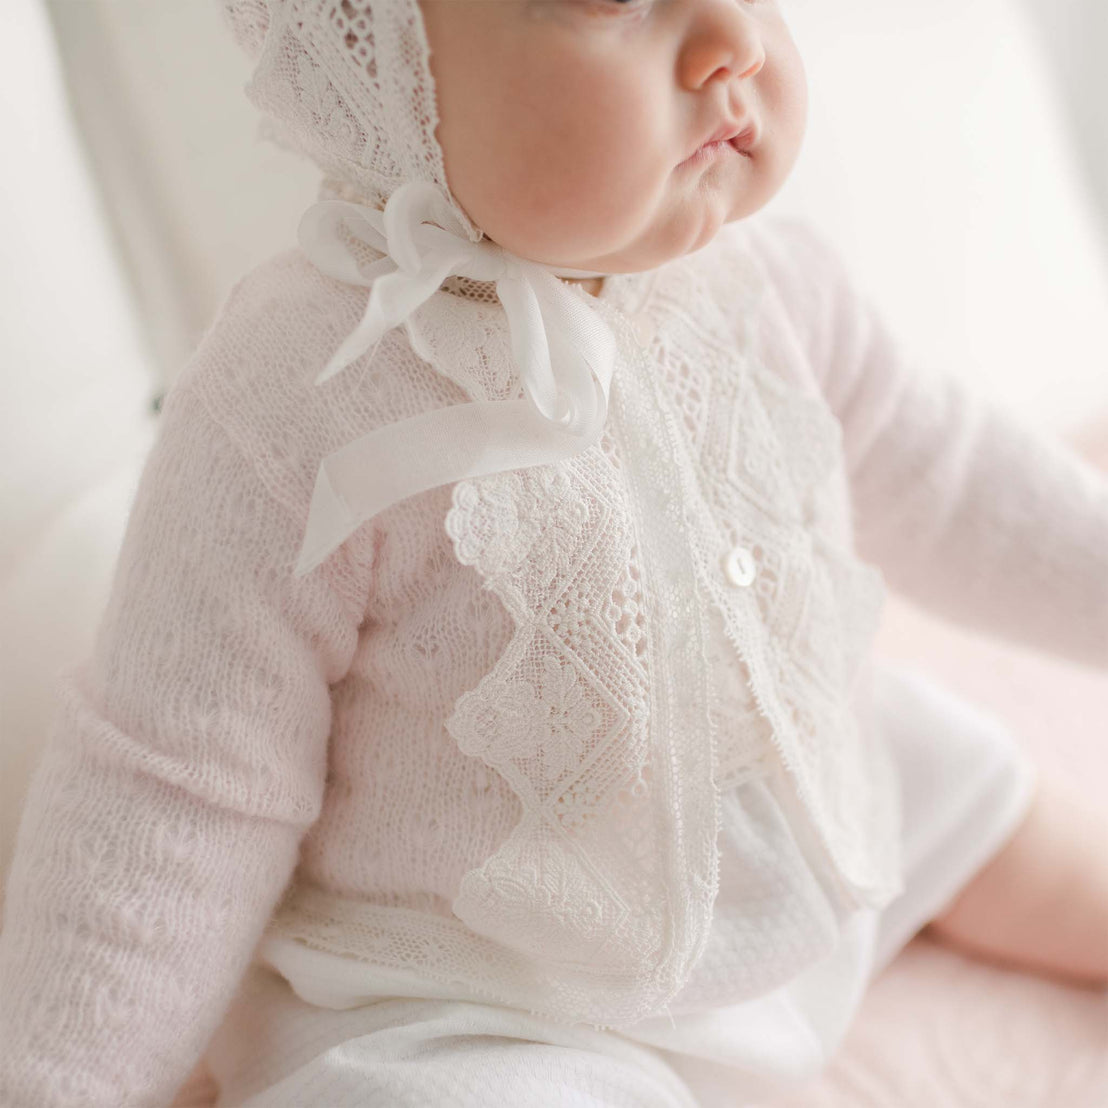 A close-up photo of a baby wearing a delicate, lacy white outfit with a matching bonnet tied with a white ribbon. The baby is seated, showcasing the finely detailed lace pattern on the outfit that looks as intricate as the Hailey Knit Sweater. The background is softly blurred and light-colored.